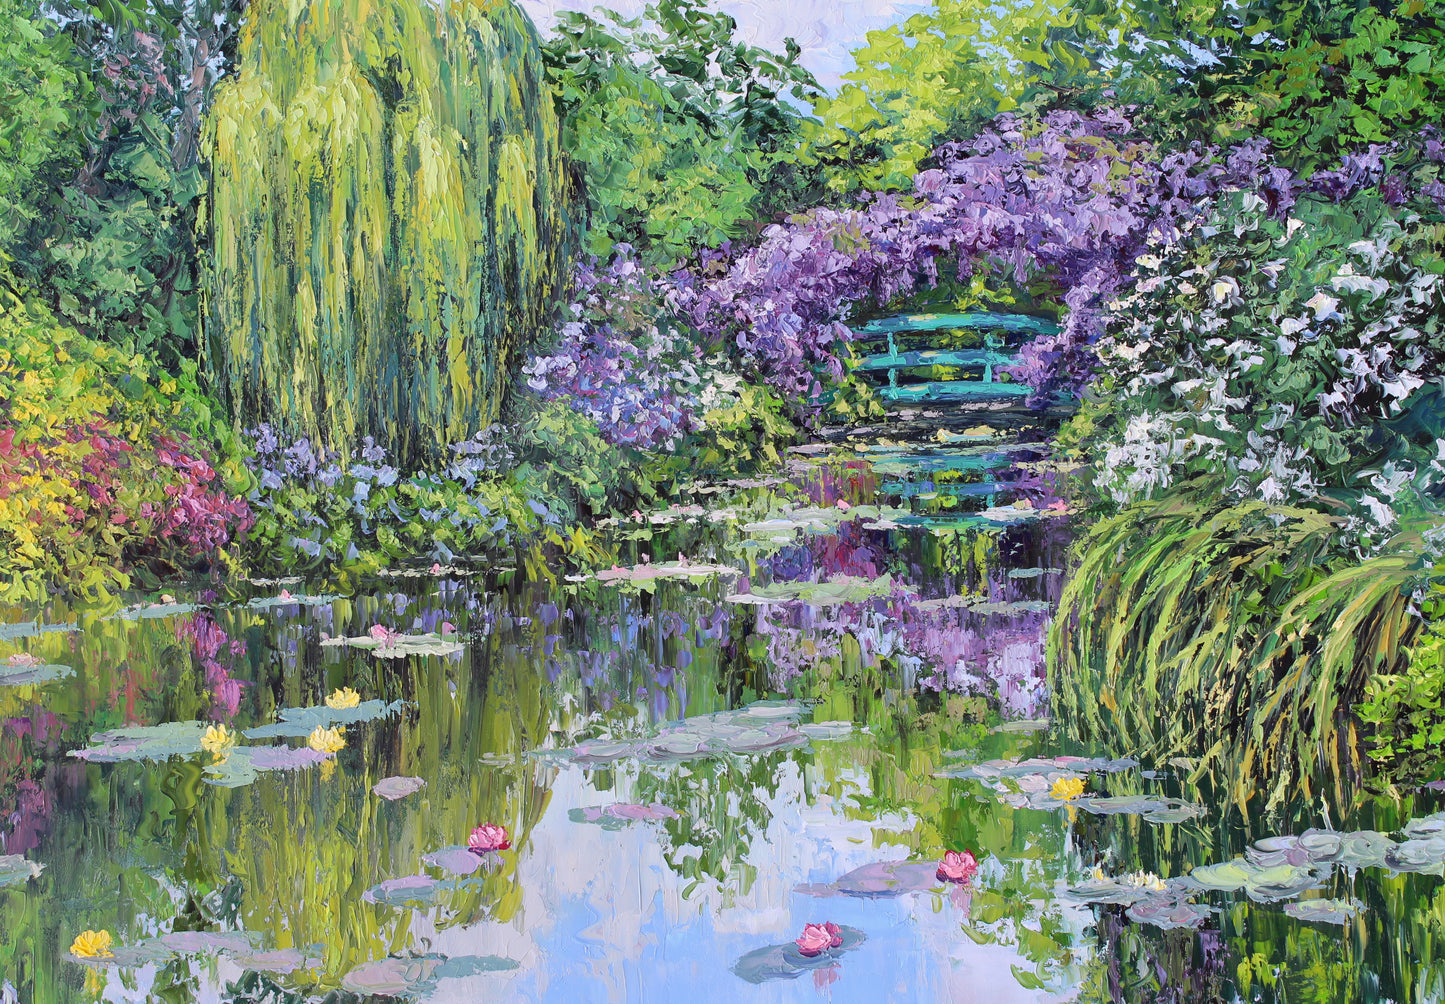 The Beauty Of Giverny, Extra Large 60" x 40" Oil Painting, Garden Landscape Of Monet's Waterlily Pond